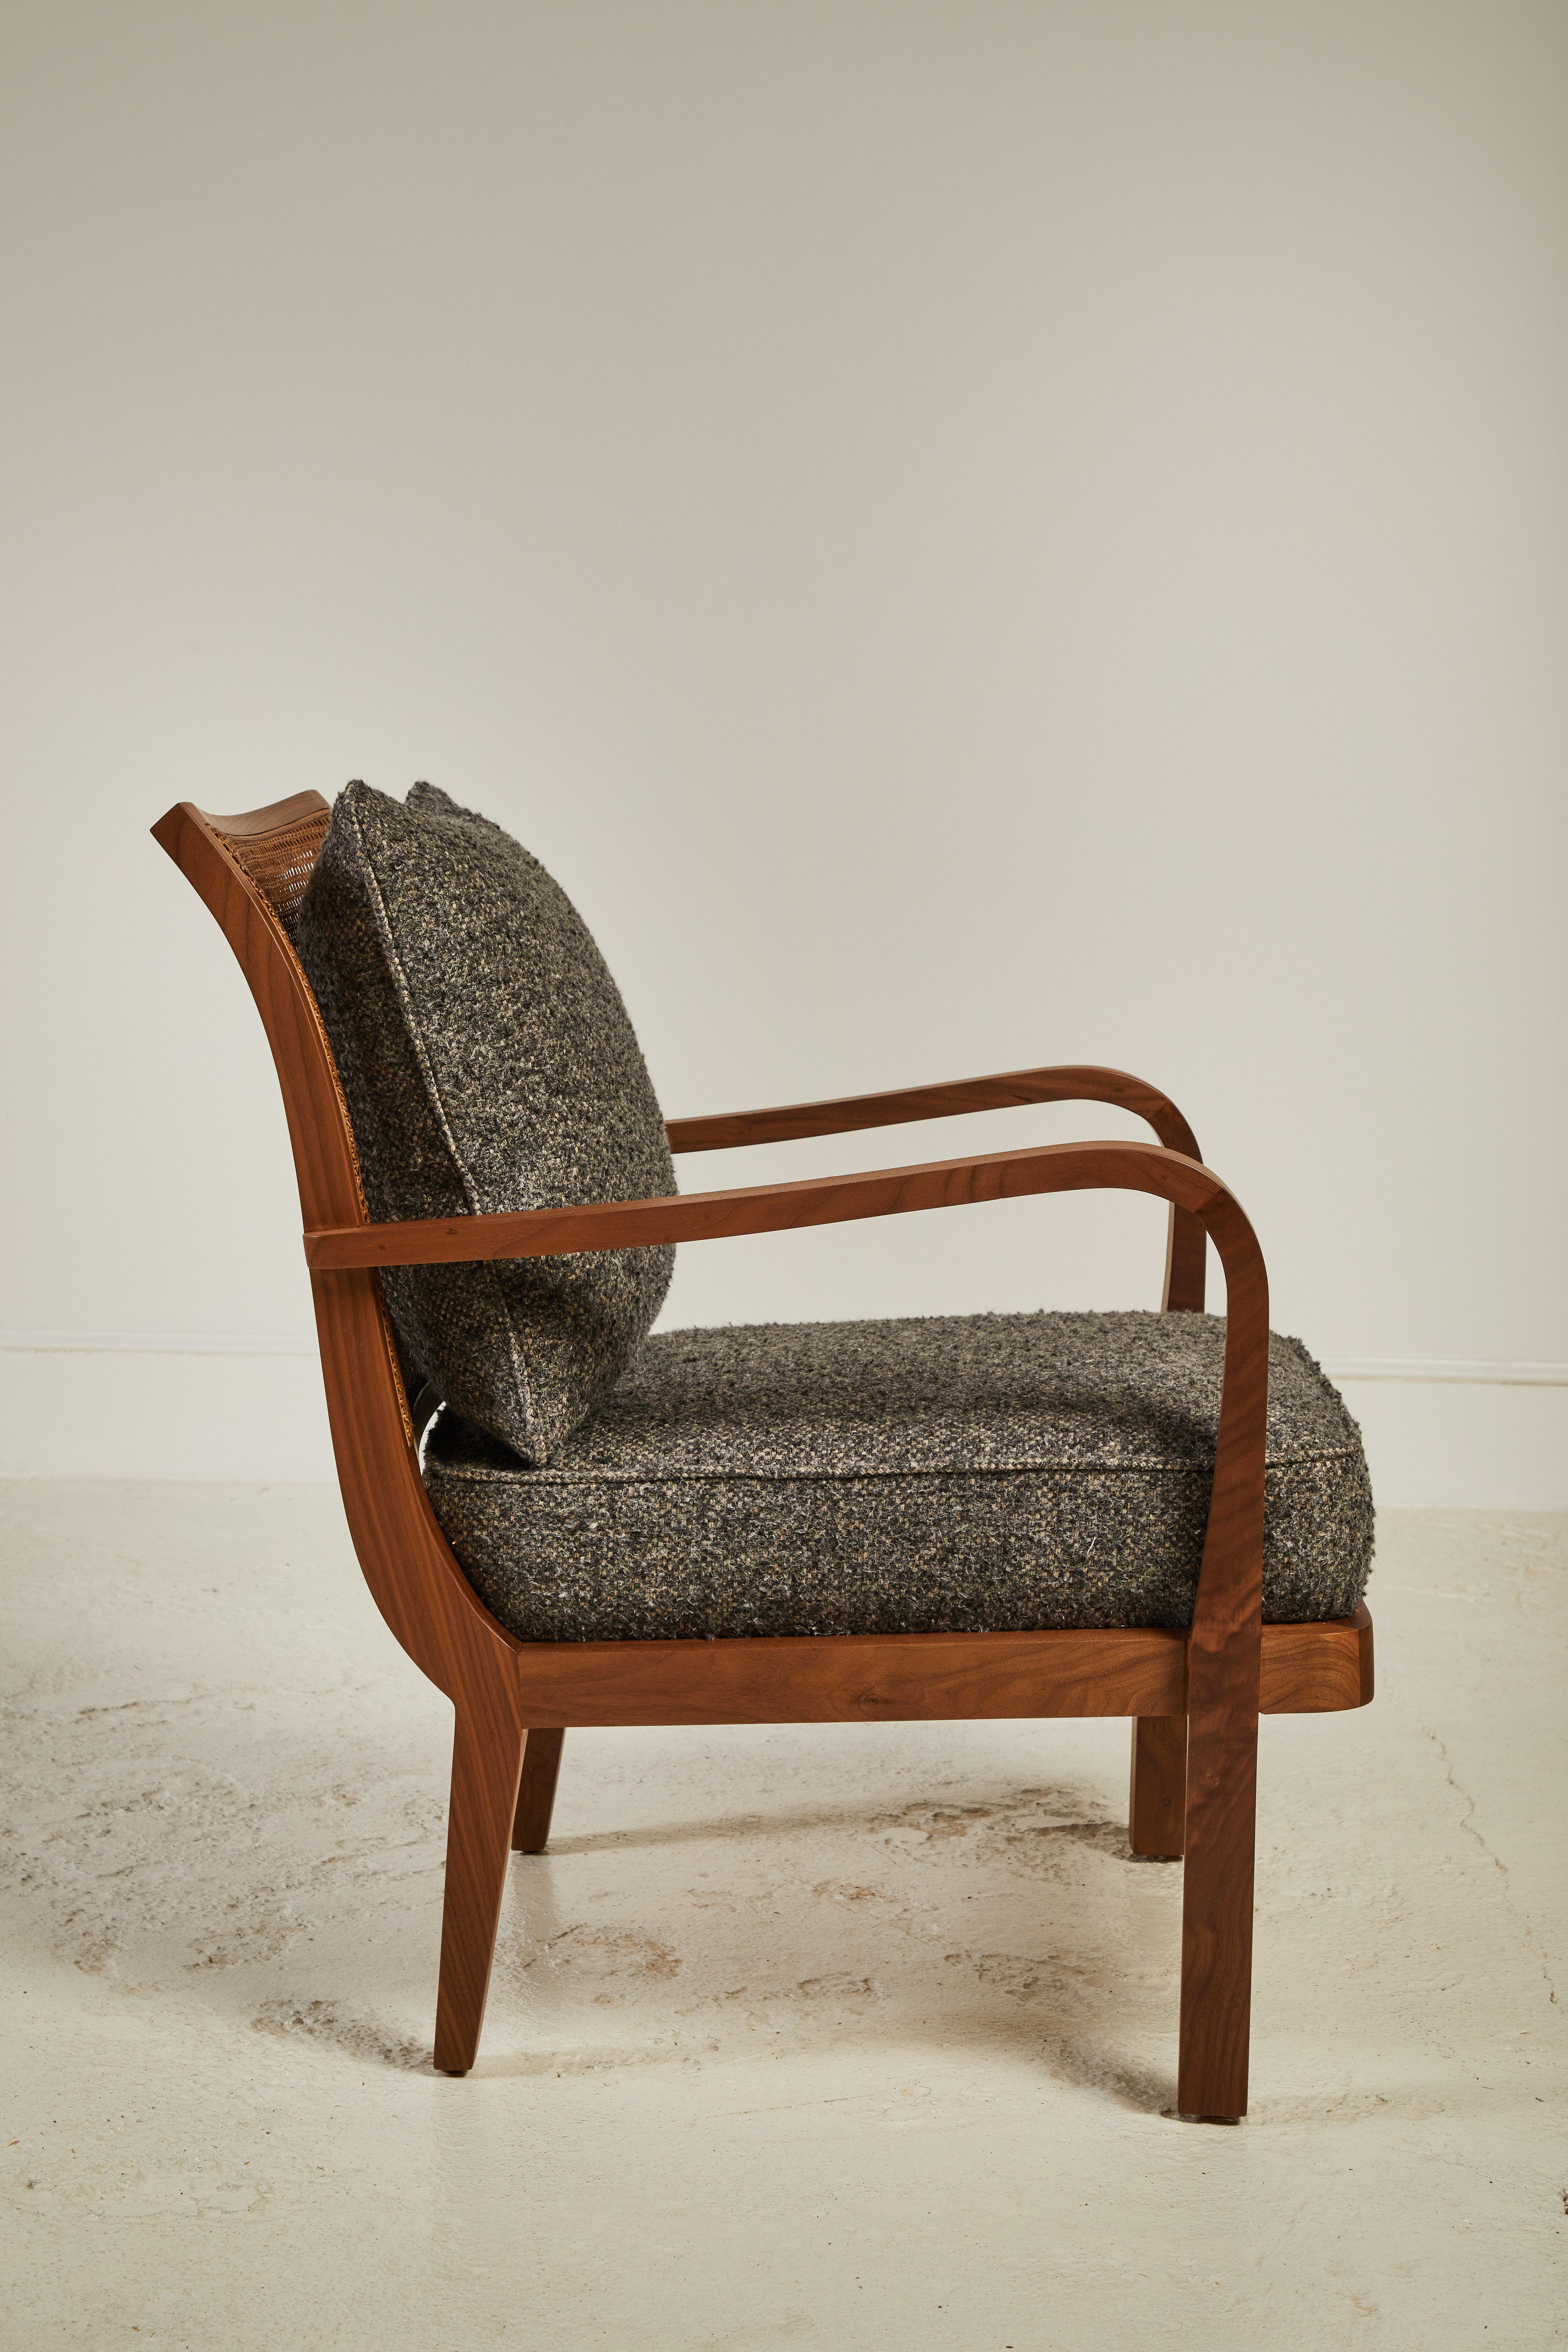 Nickey Kehoe collection cane back chair is a spin on the classic occasion chair. The chair sits upright with a comfortable tight seat and loose back cushion. The chair is constructed in walnut wood, and has a beautiful caned back. This specific